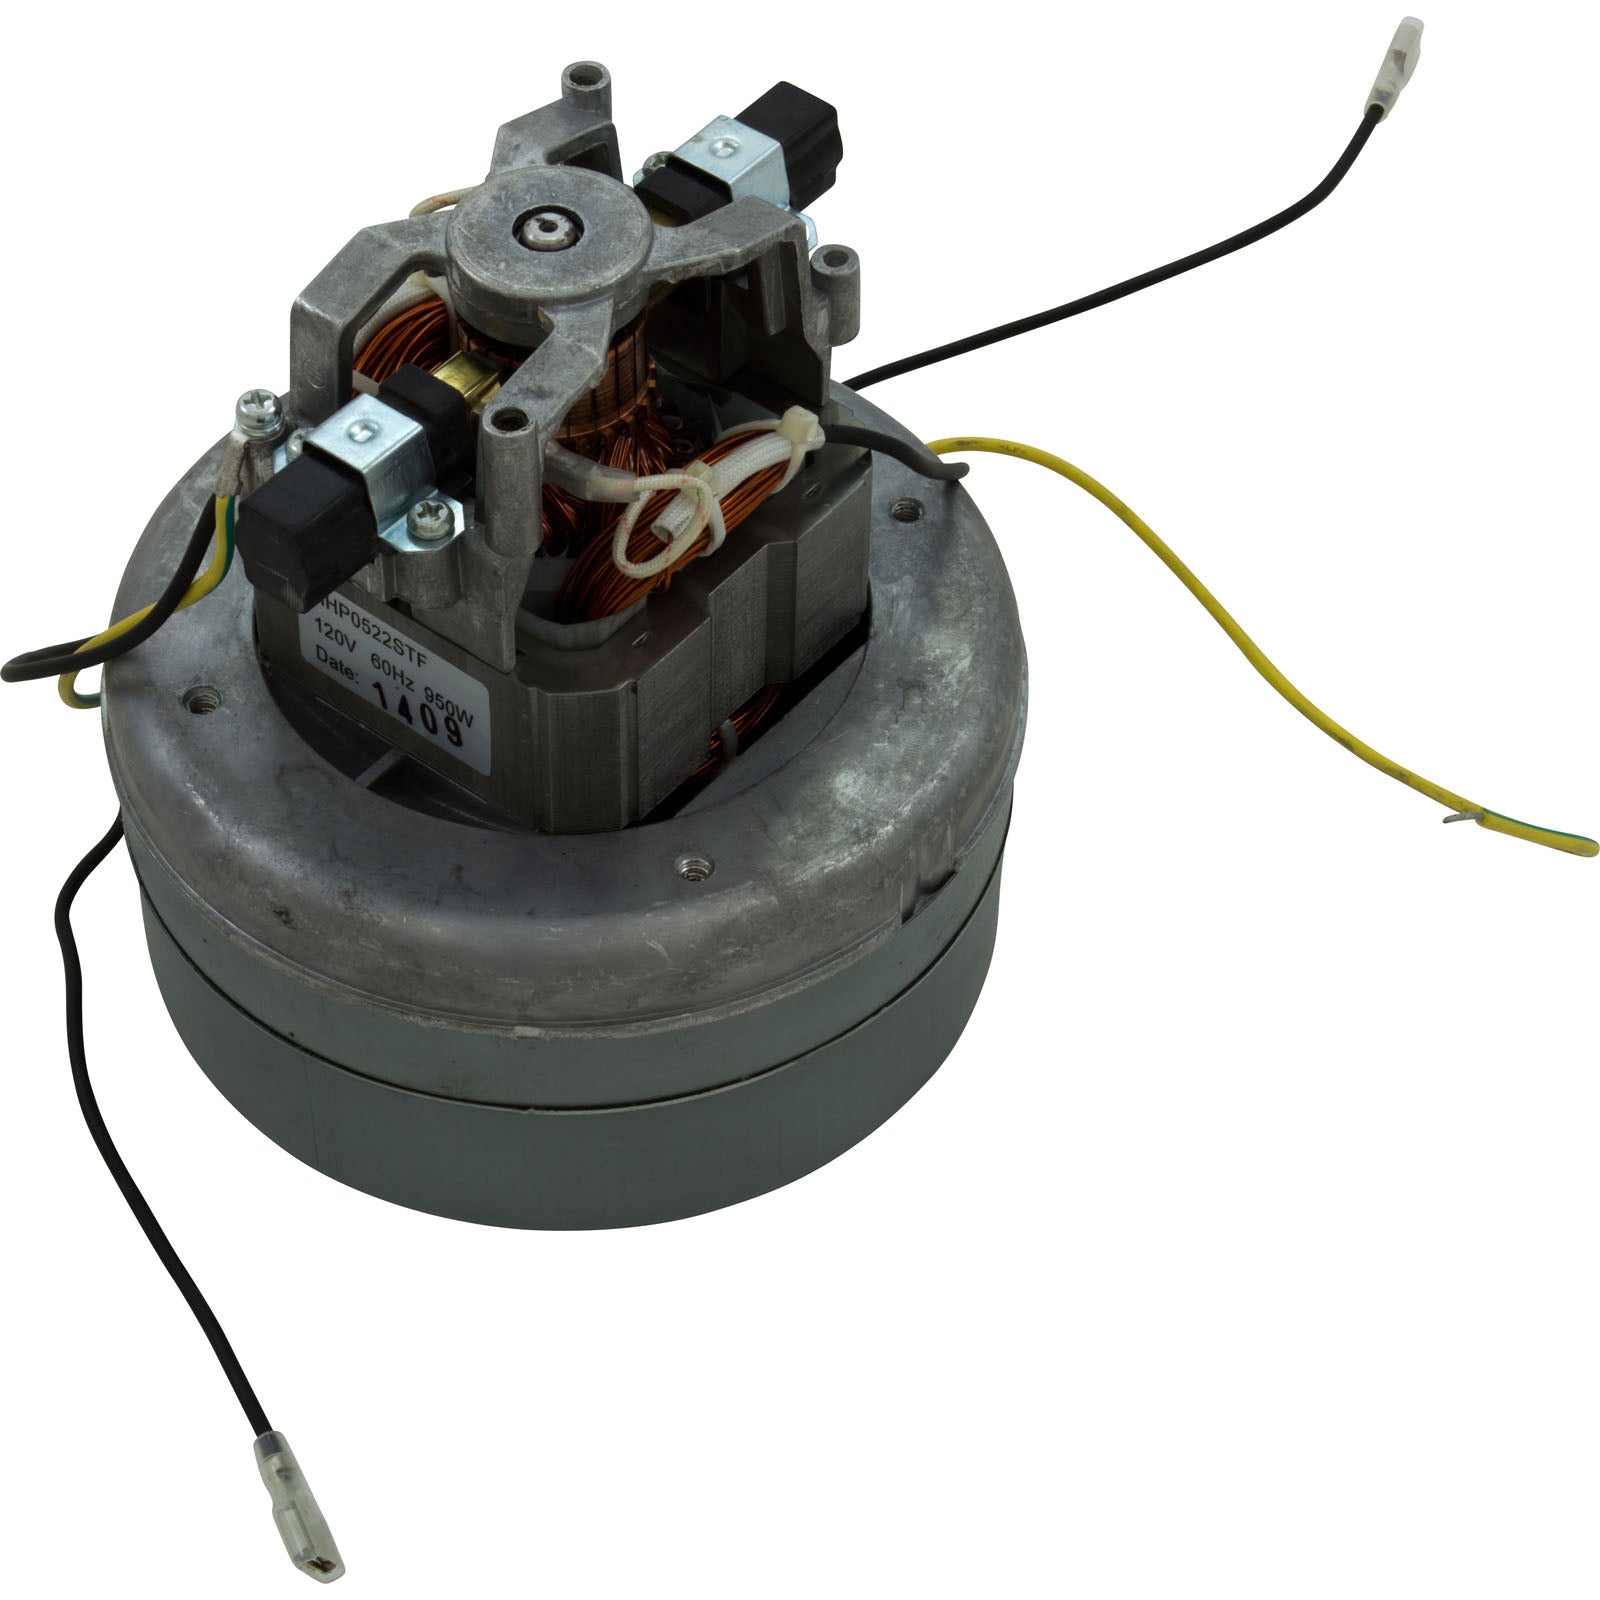 Sundance Air Blower Motor with Thermal Protection, [1.0 hp] [240v] [6500-103]